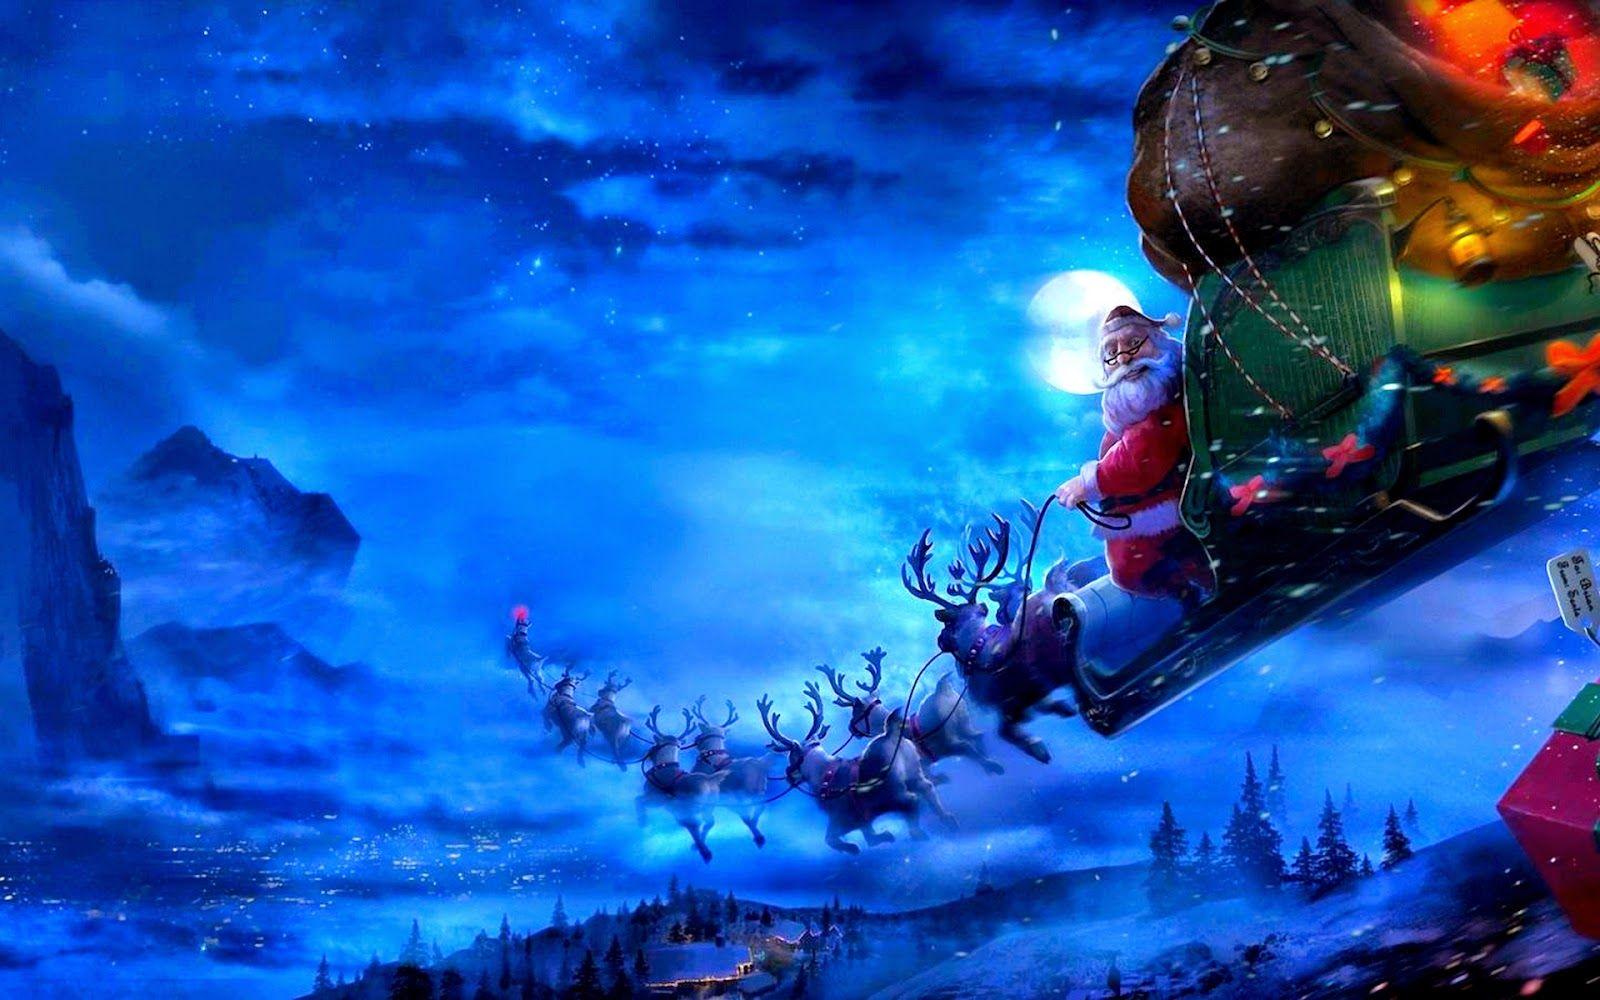 Santa Claus coming to town riding his reindeer sleigh flying in sky